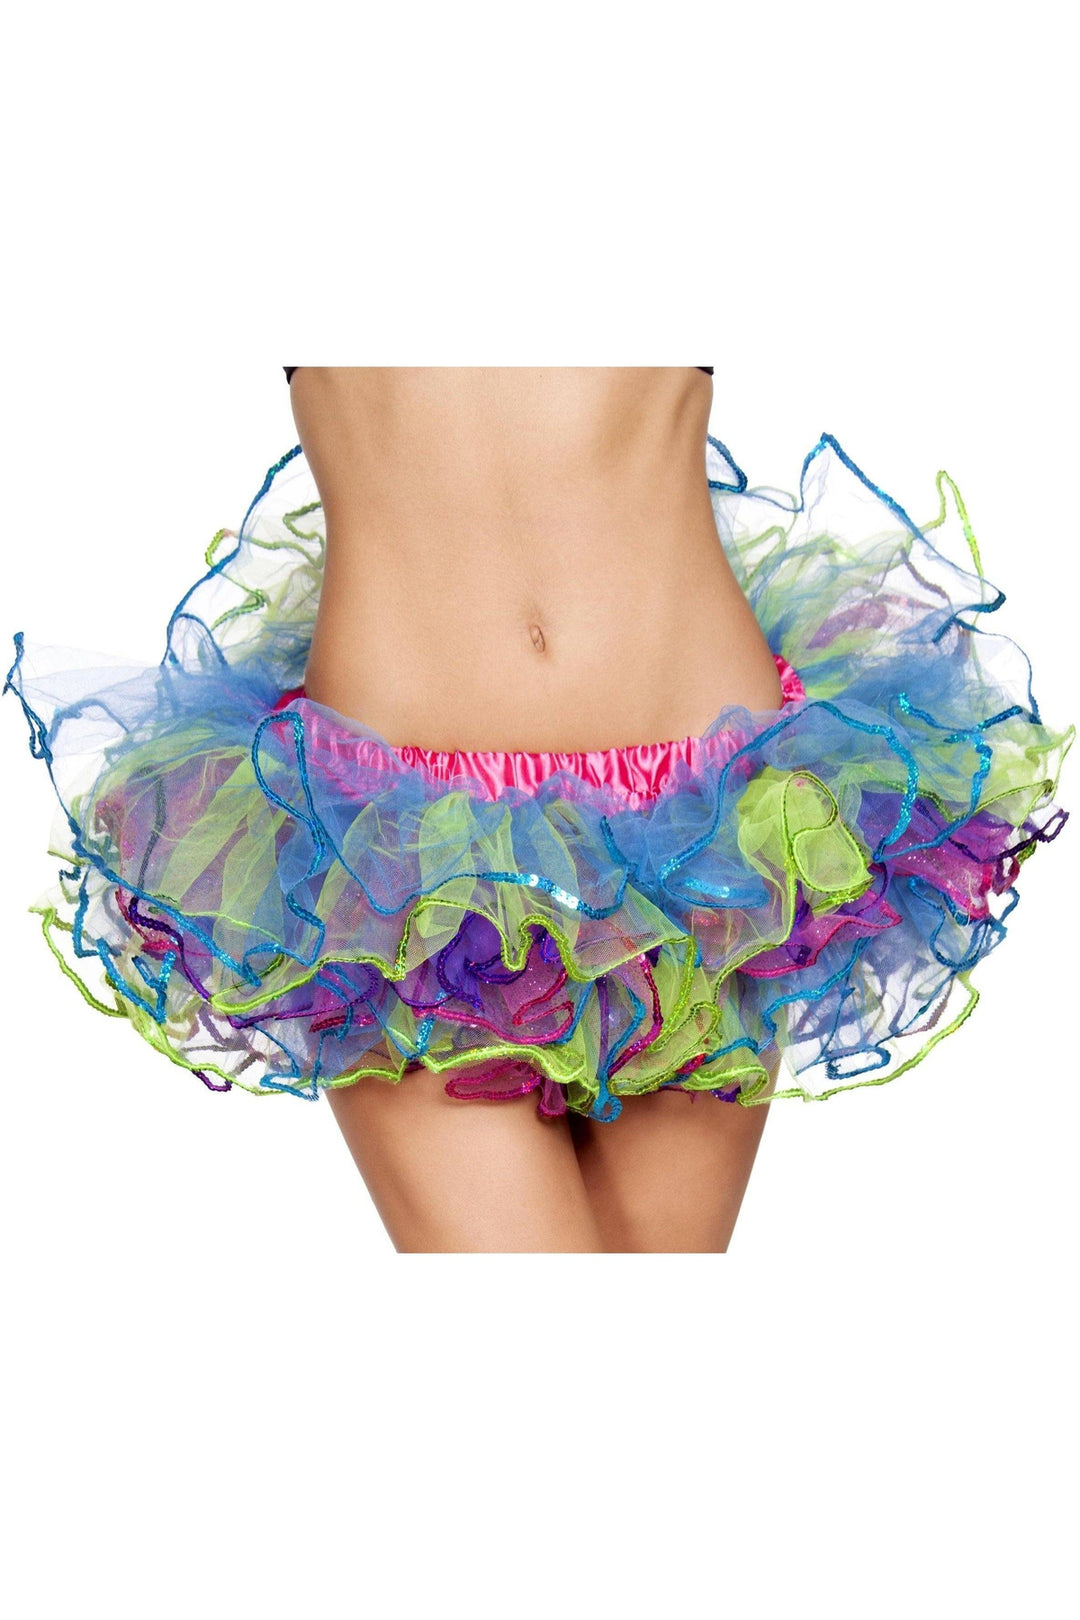 Roma Rainbow with Sequin Trimmed Petticoat Costume-SEXYSHOES.COM